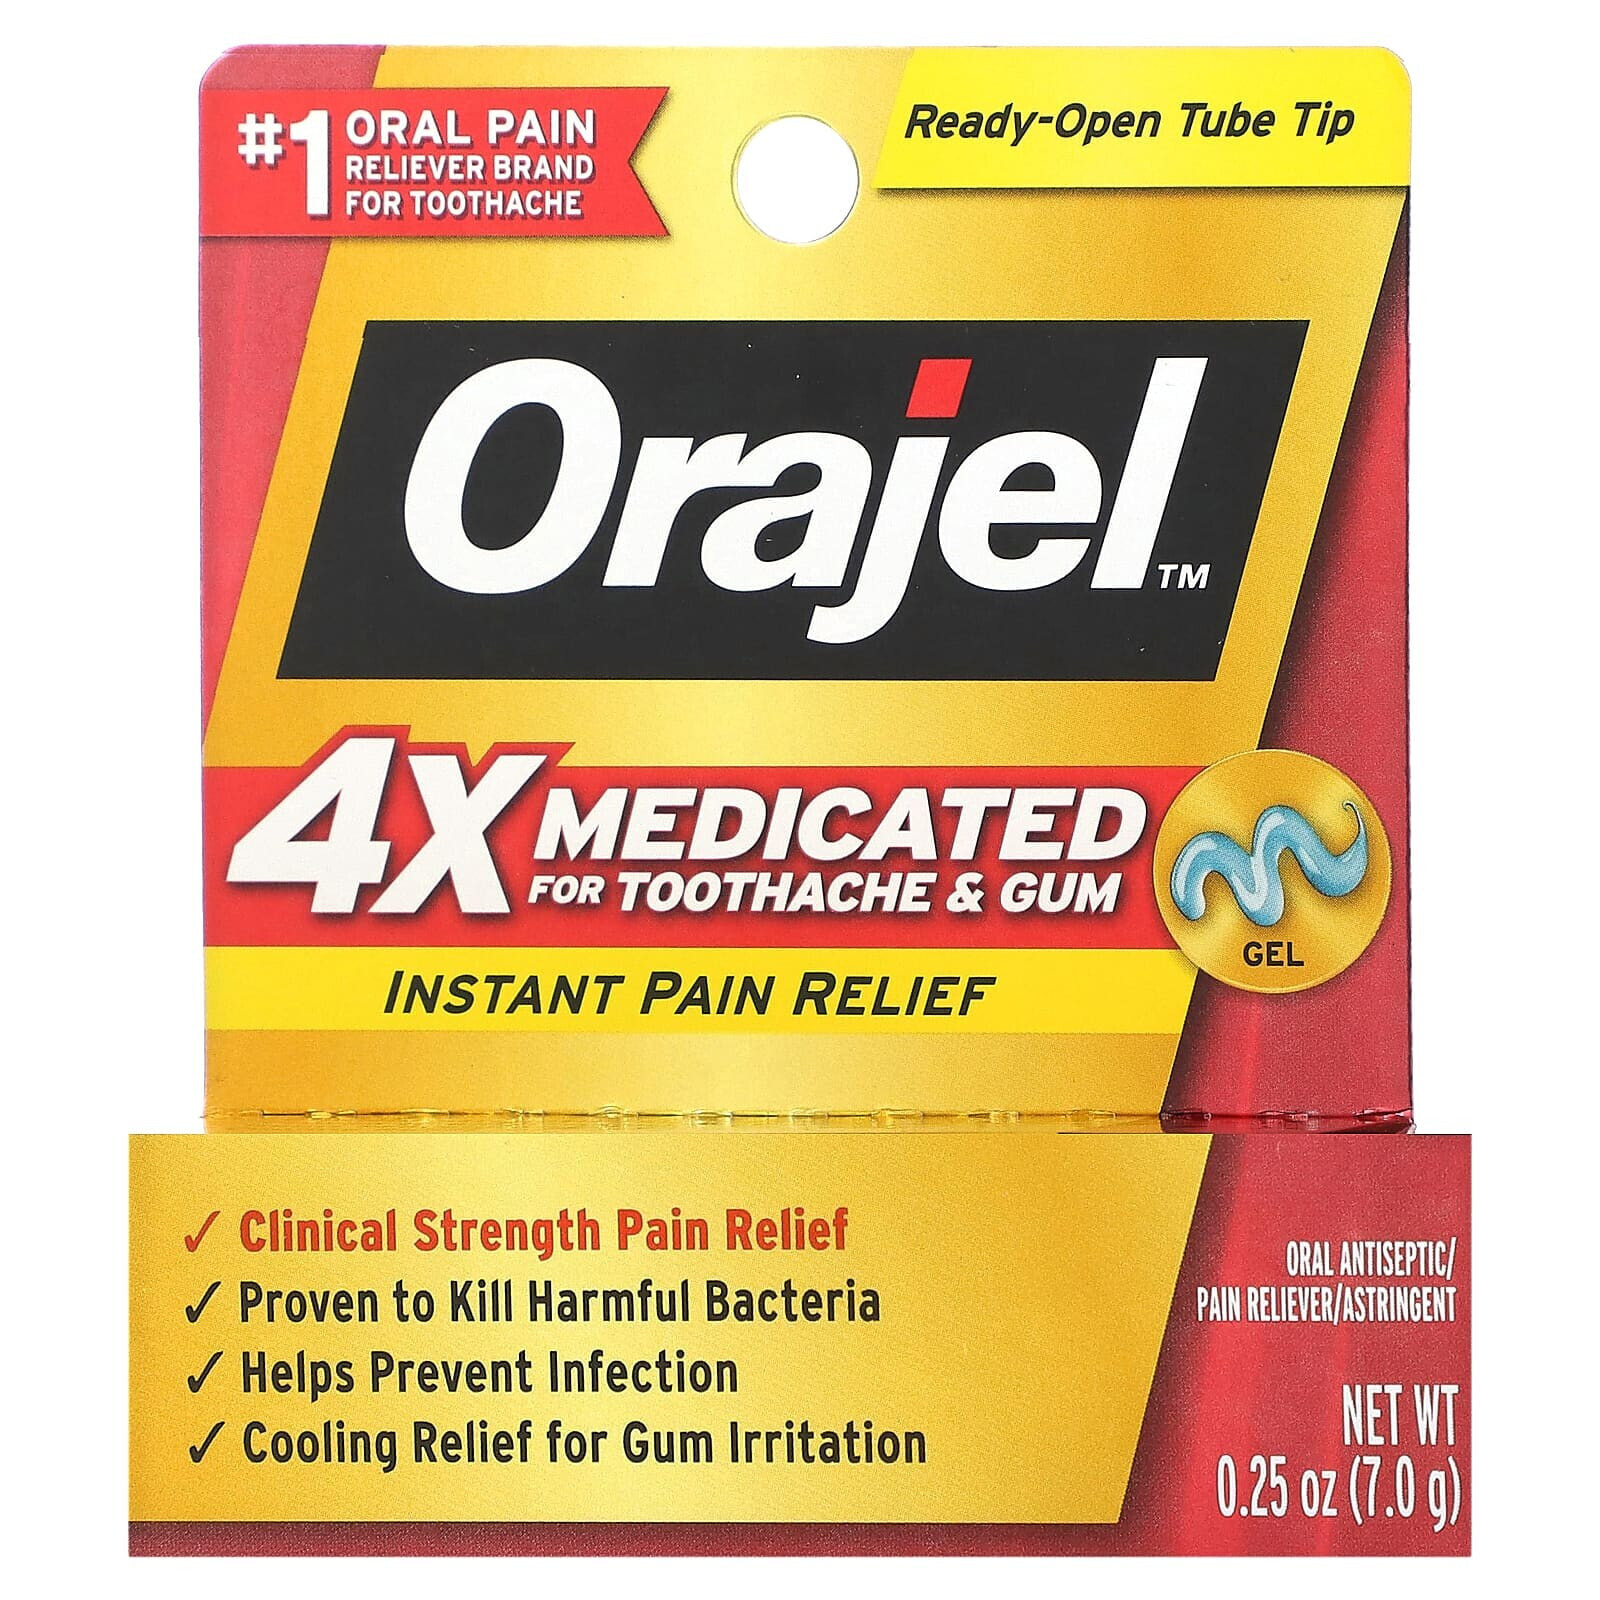 Orajel, Instant Pain Relief Gel, 4X Medicated For Toothache & Gum, 0.25 oz (7 g)